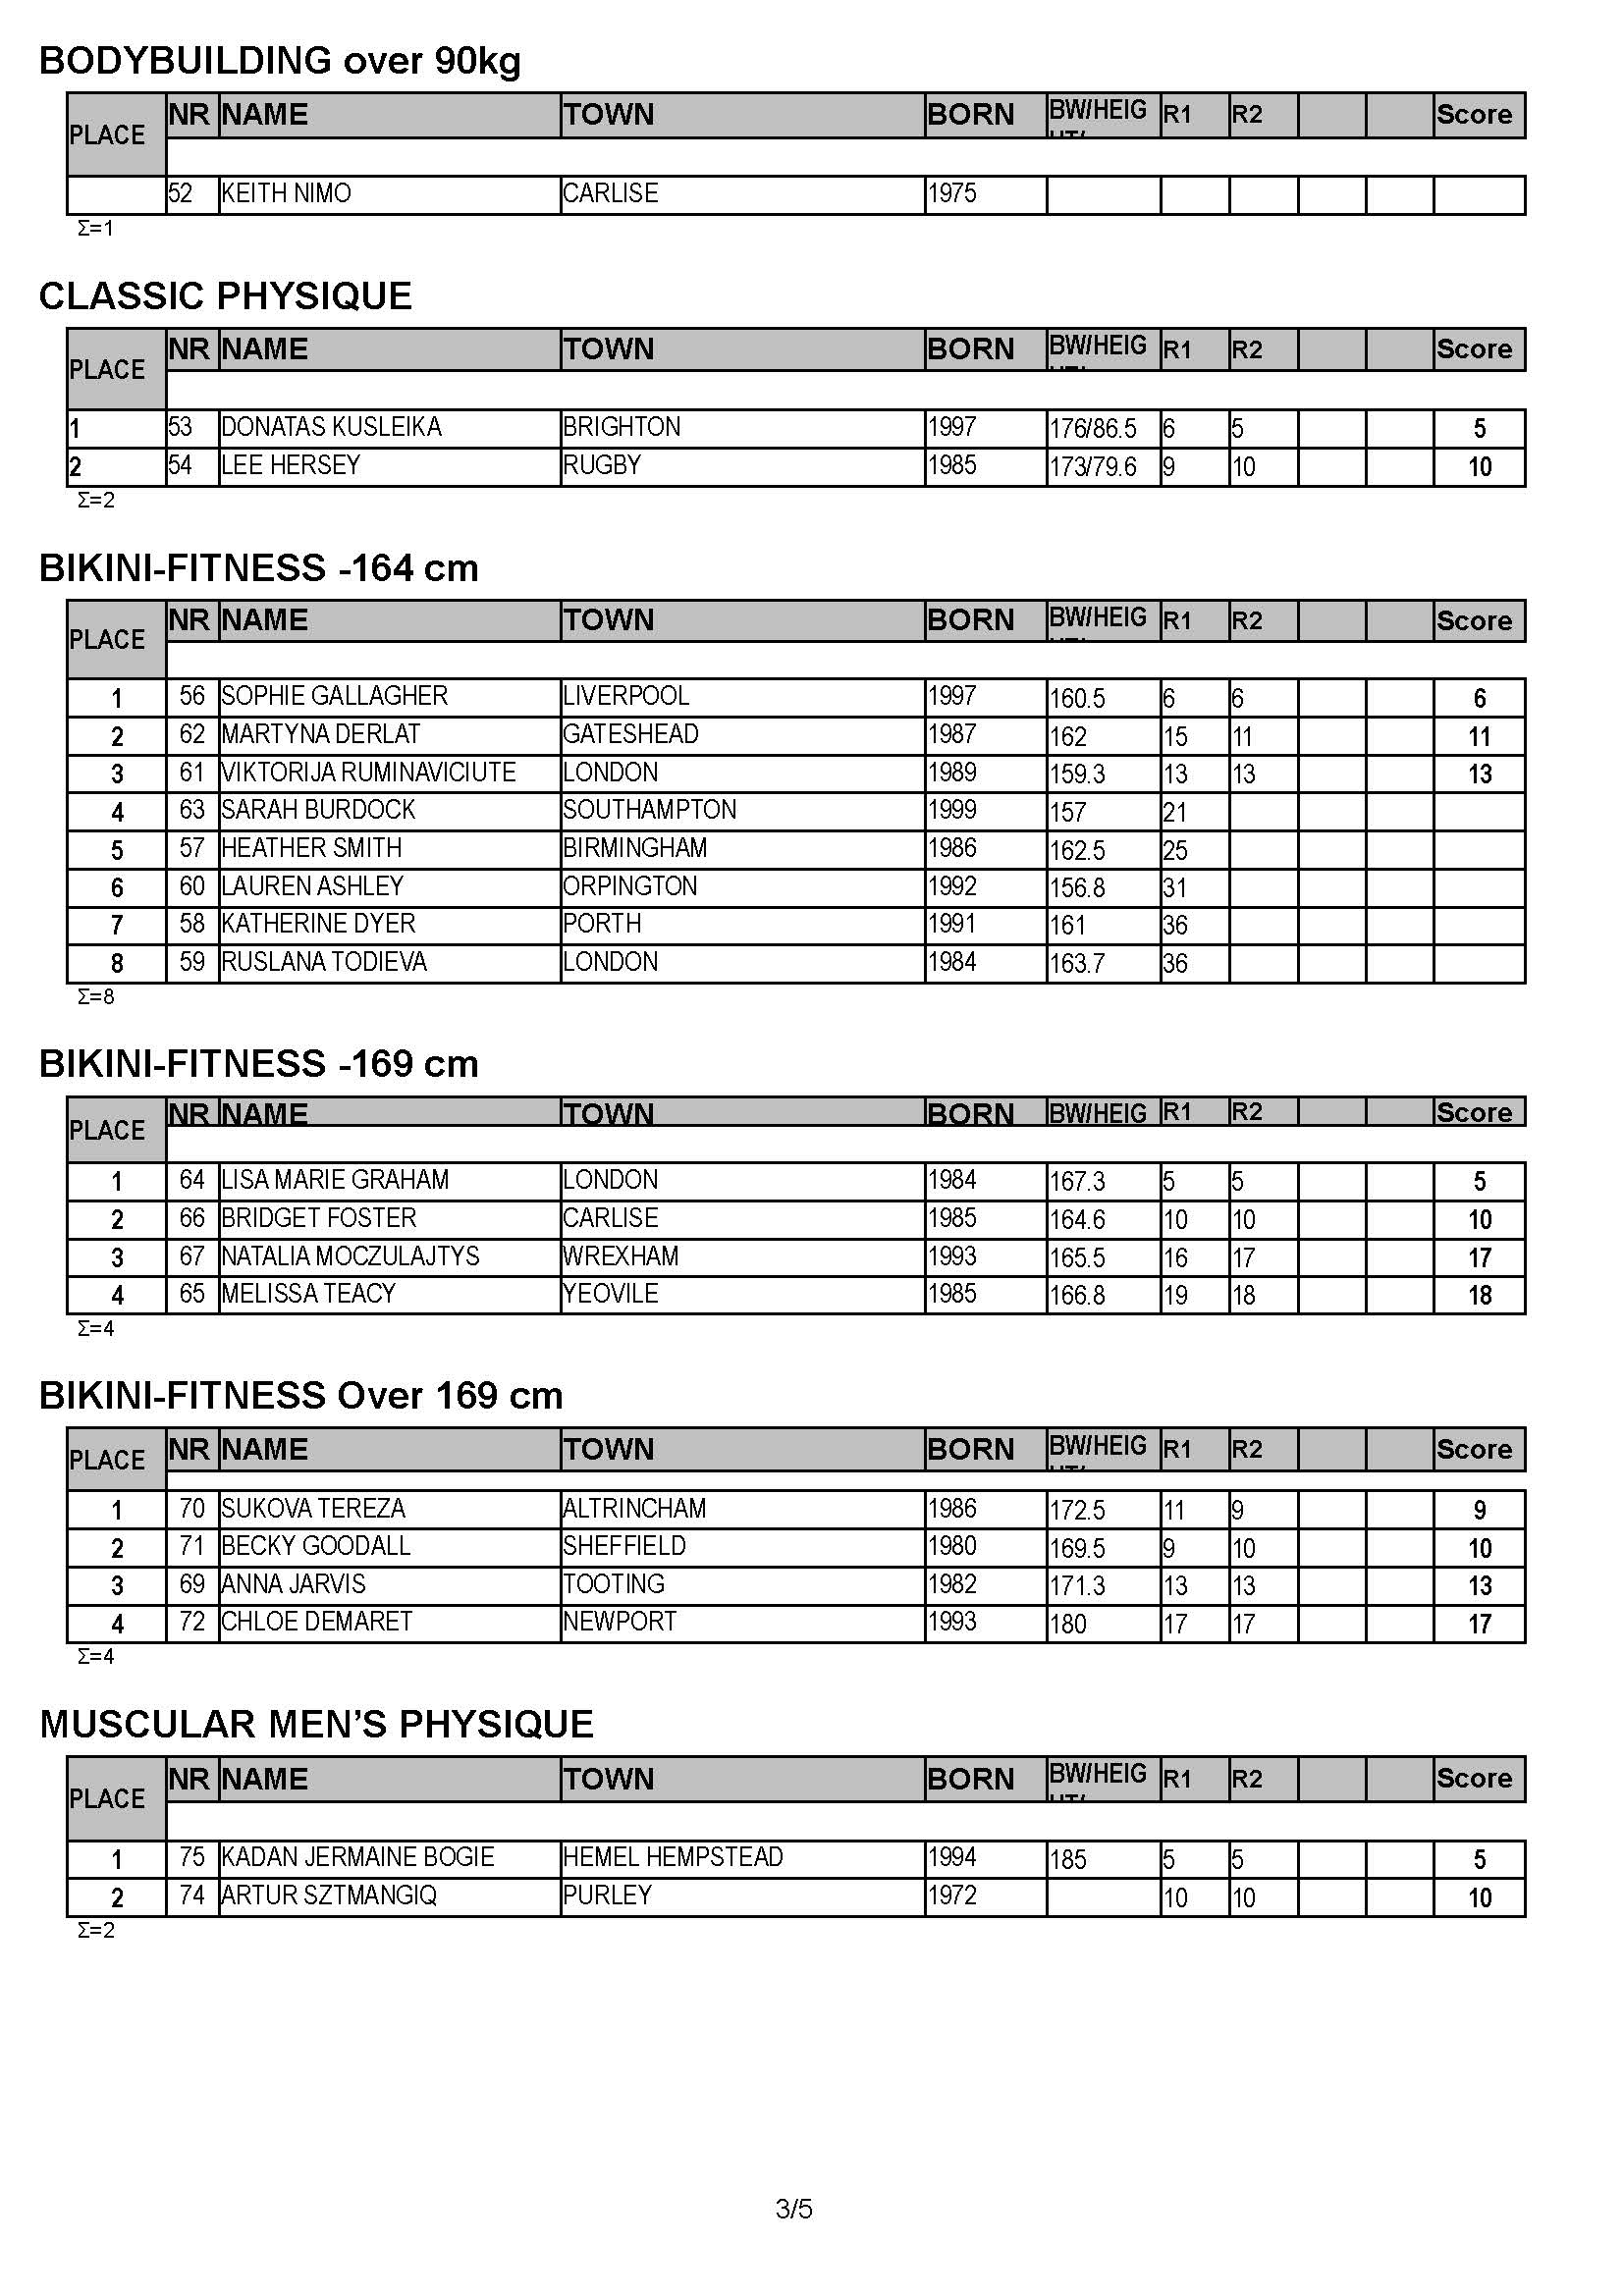 2019 UK NATIONALS RESULTS_Page_3.jpg